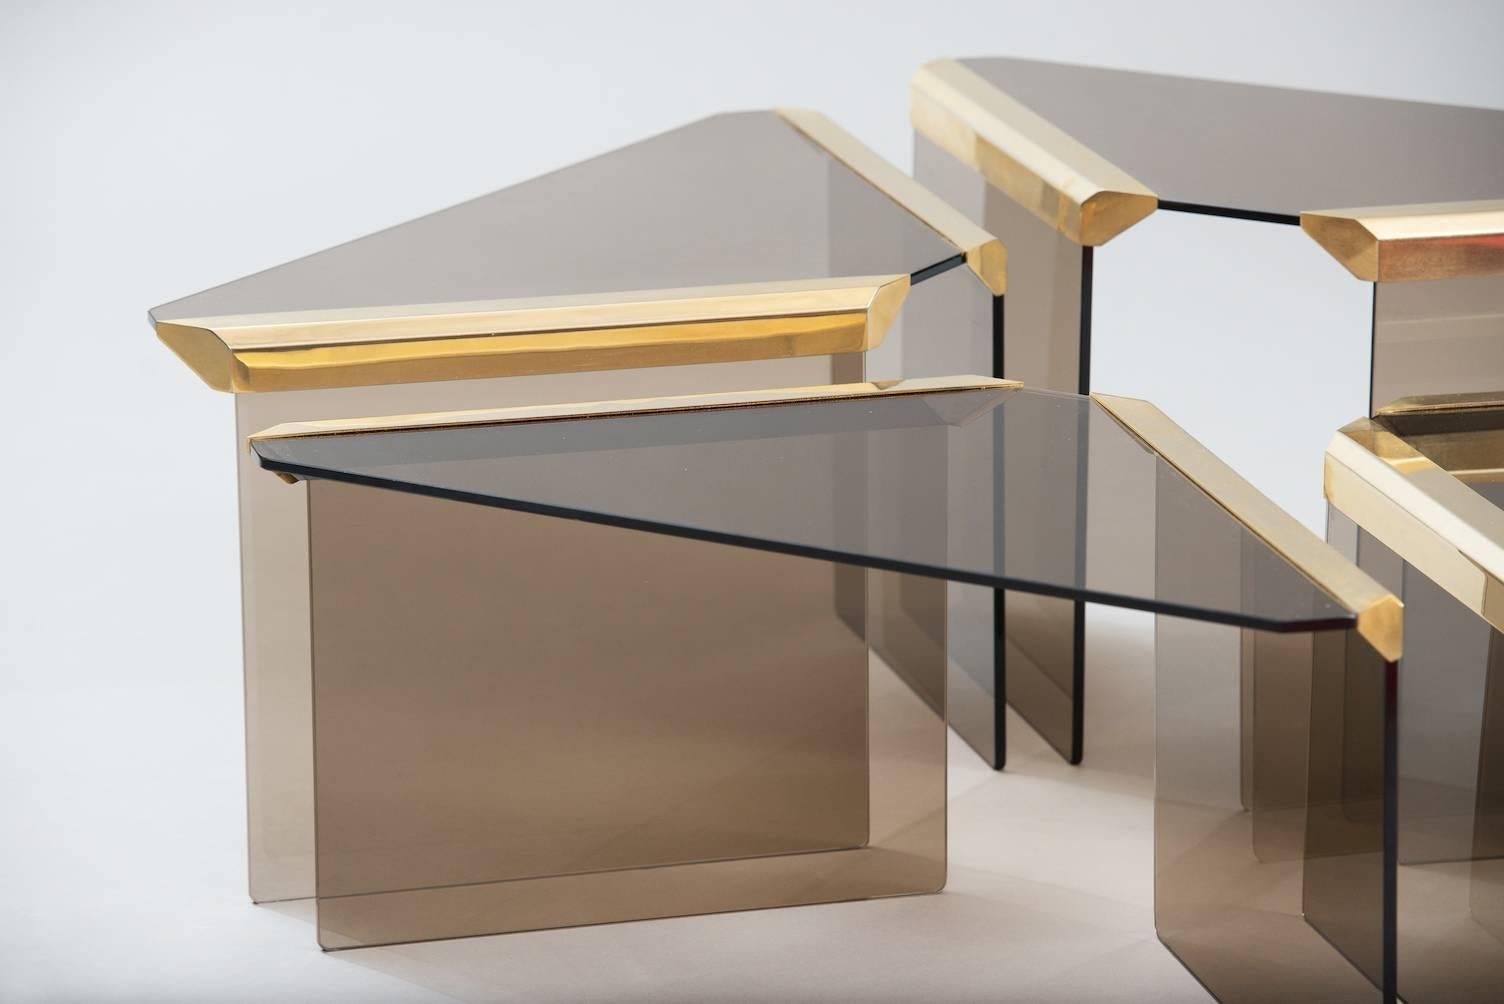 Set of four smoked glass and brass nesting tables.
Producer: Gallotti & Radice.
The measures are for the biggest table.